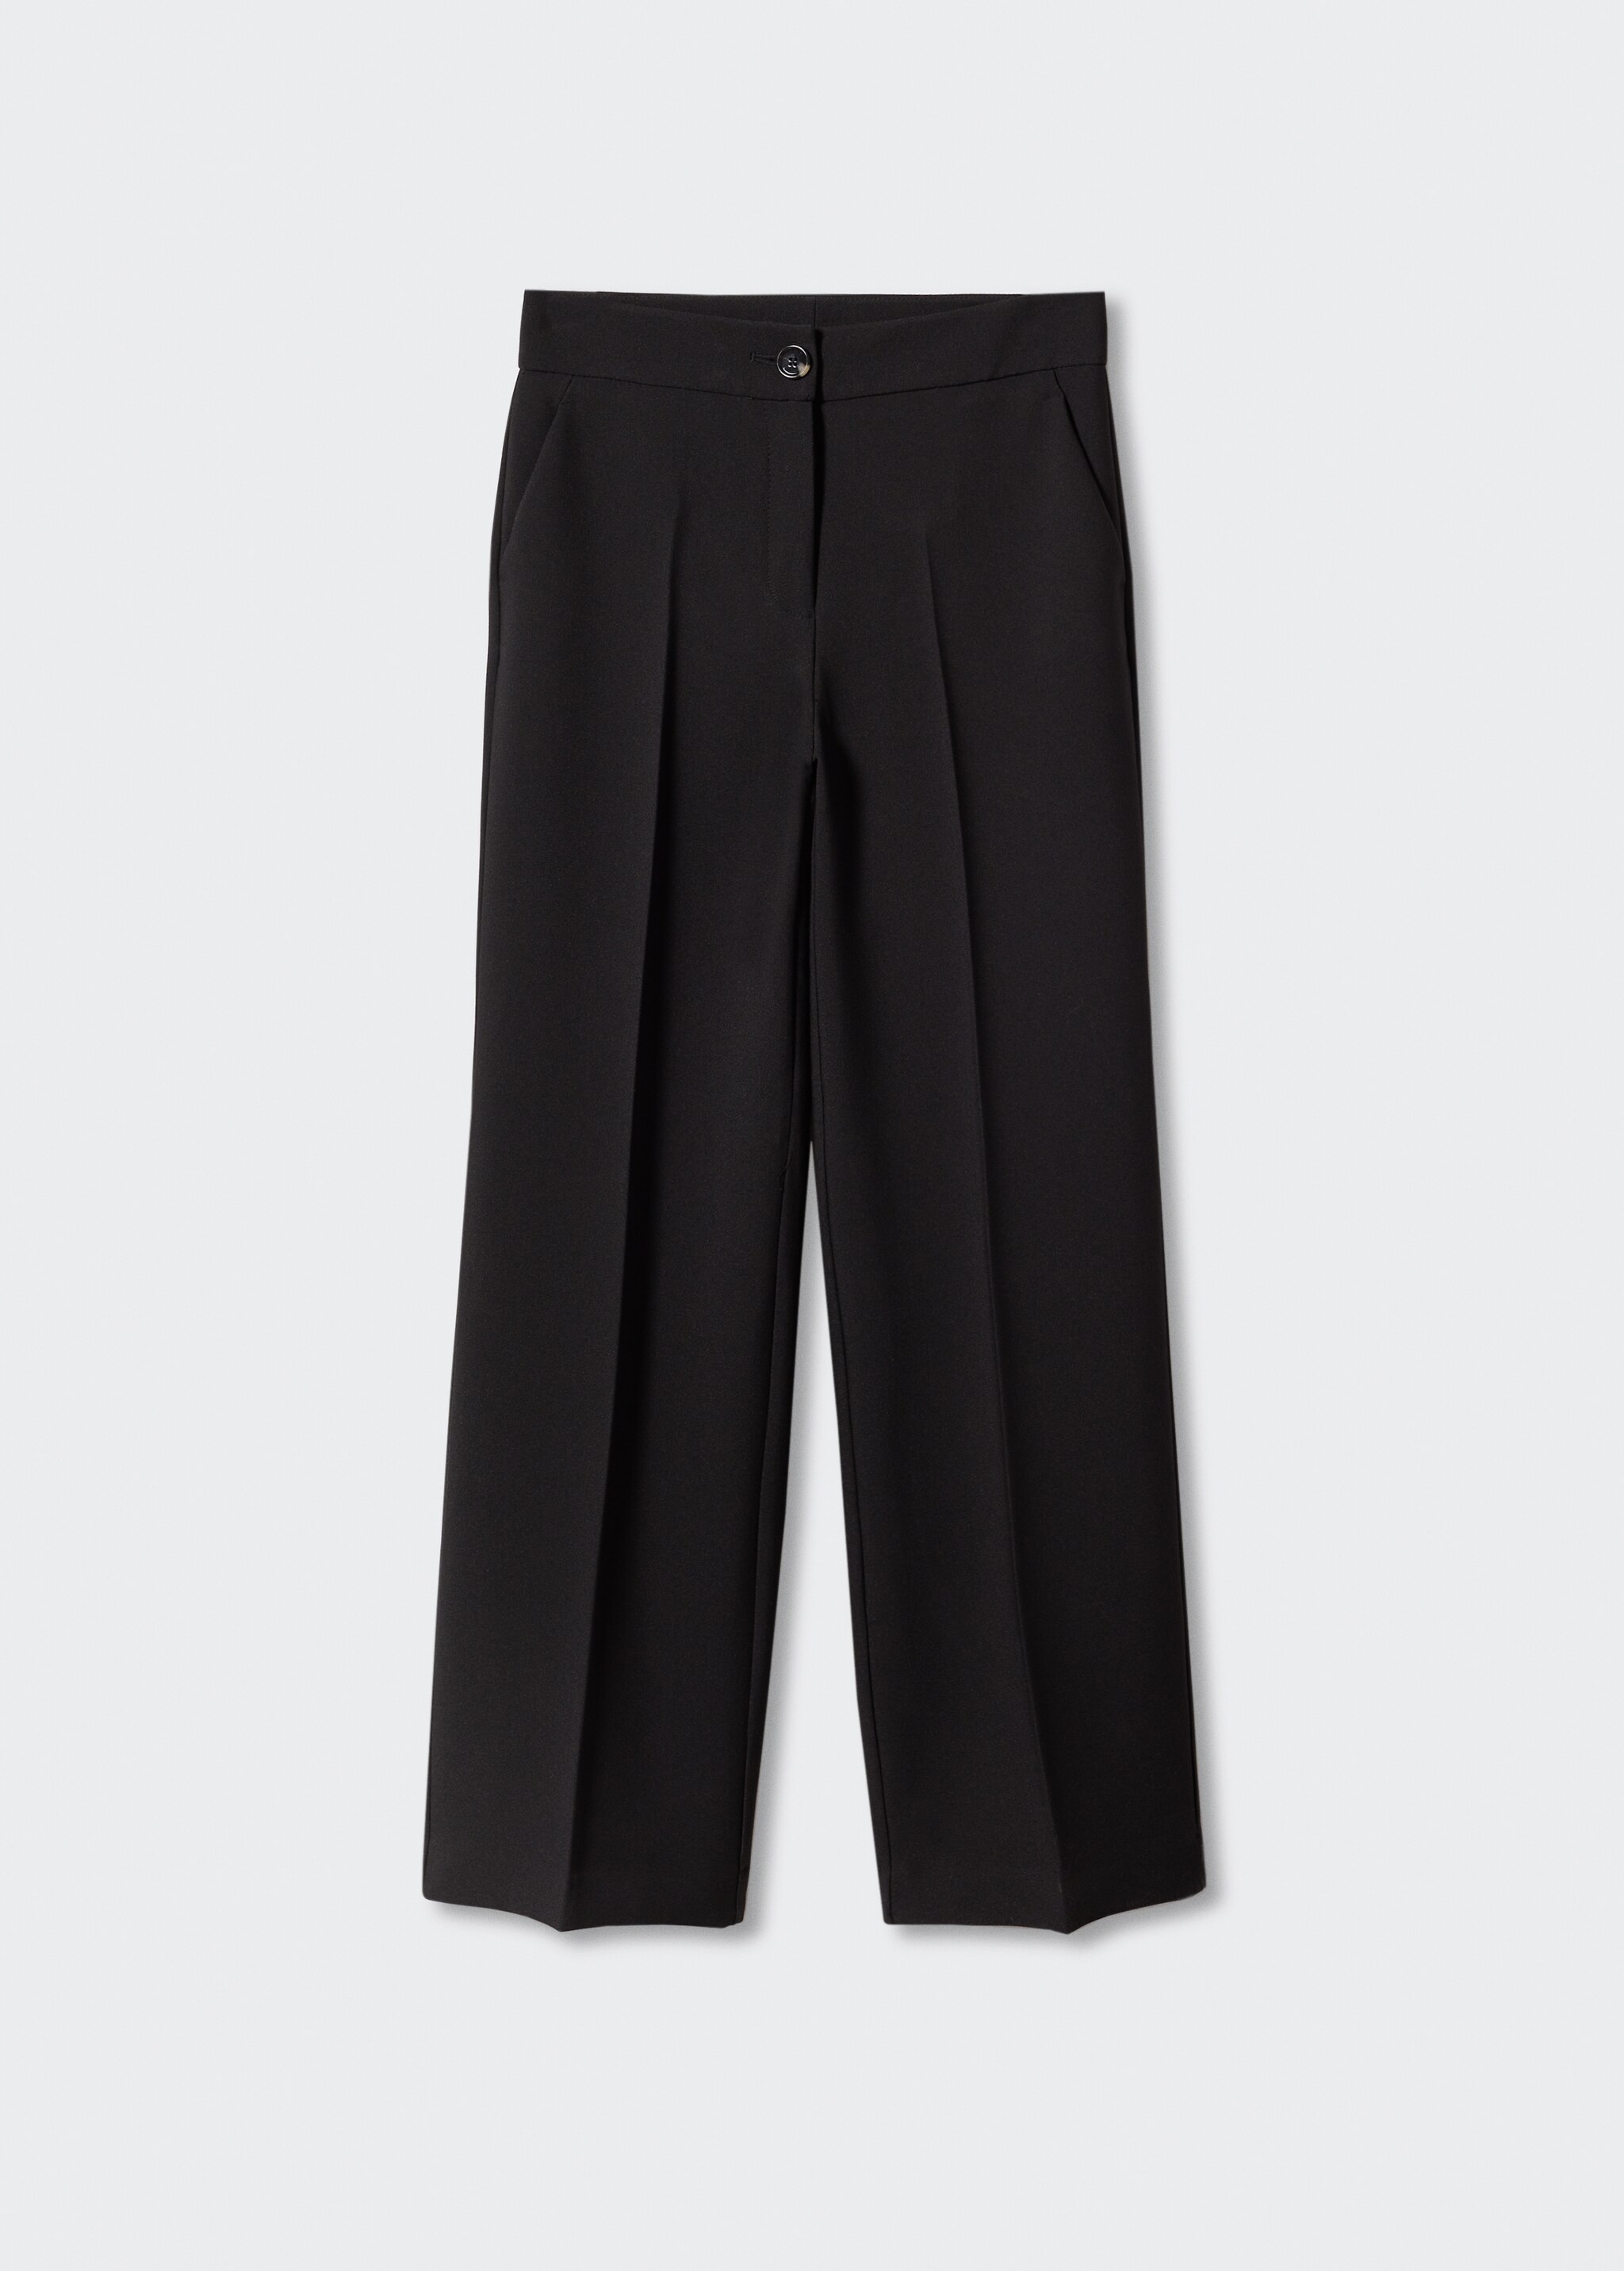 Flowy palazzo trousers - Article without model